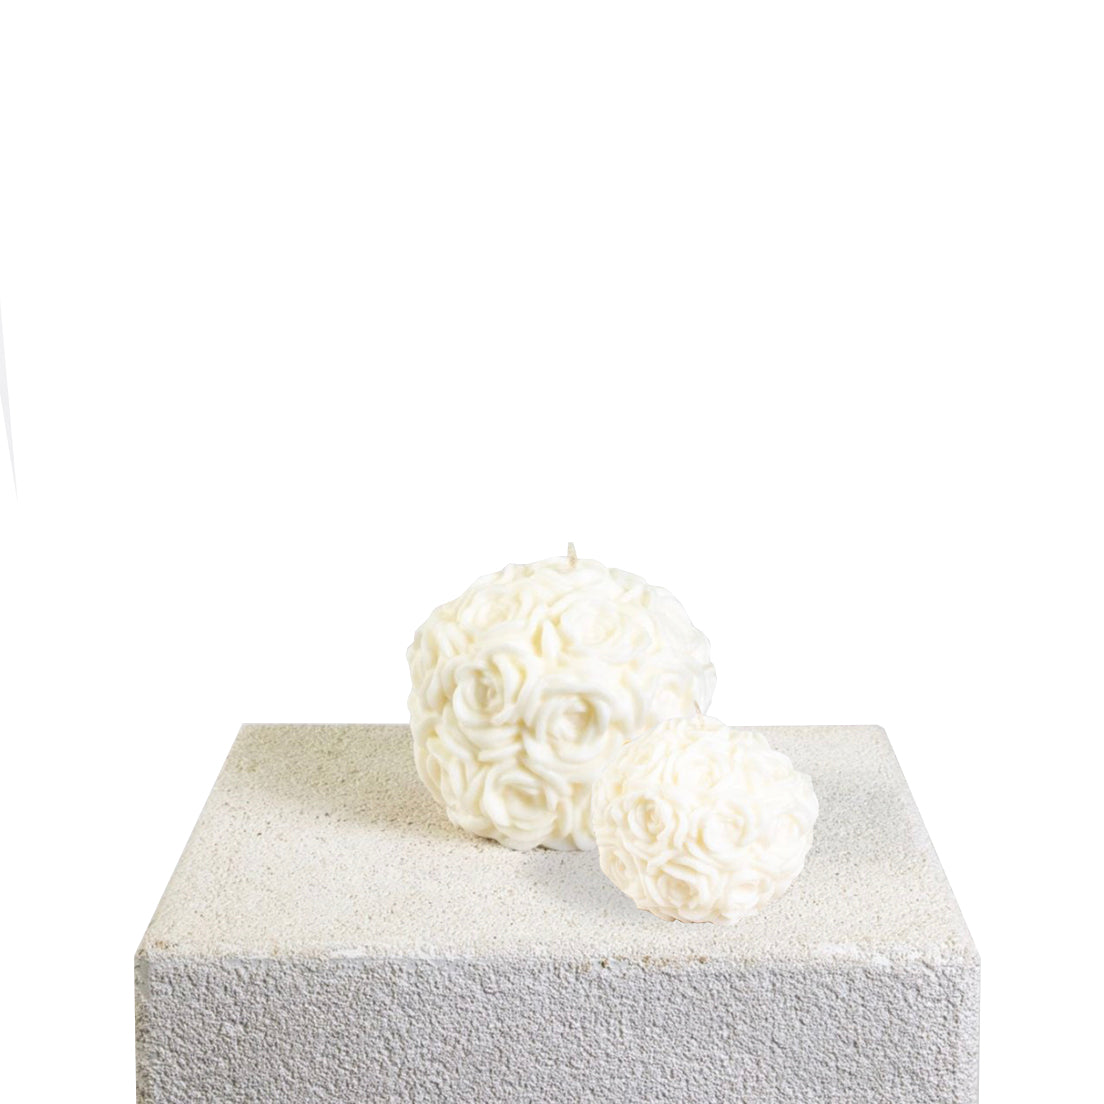 Rose Ball Sculptural Soy Wax Candle Collection